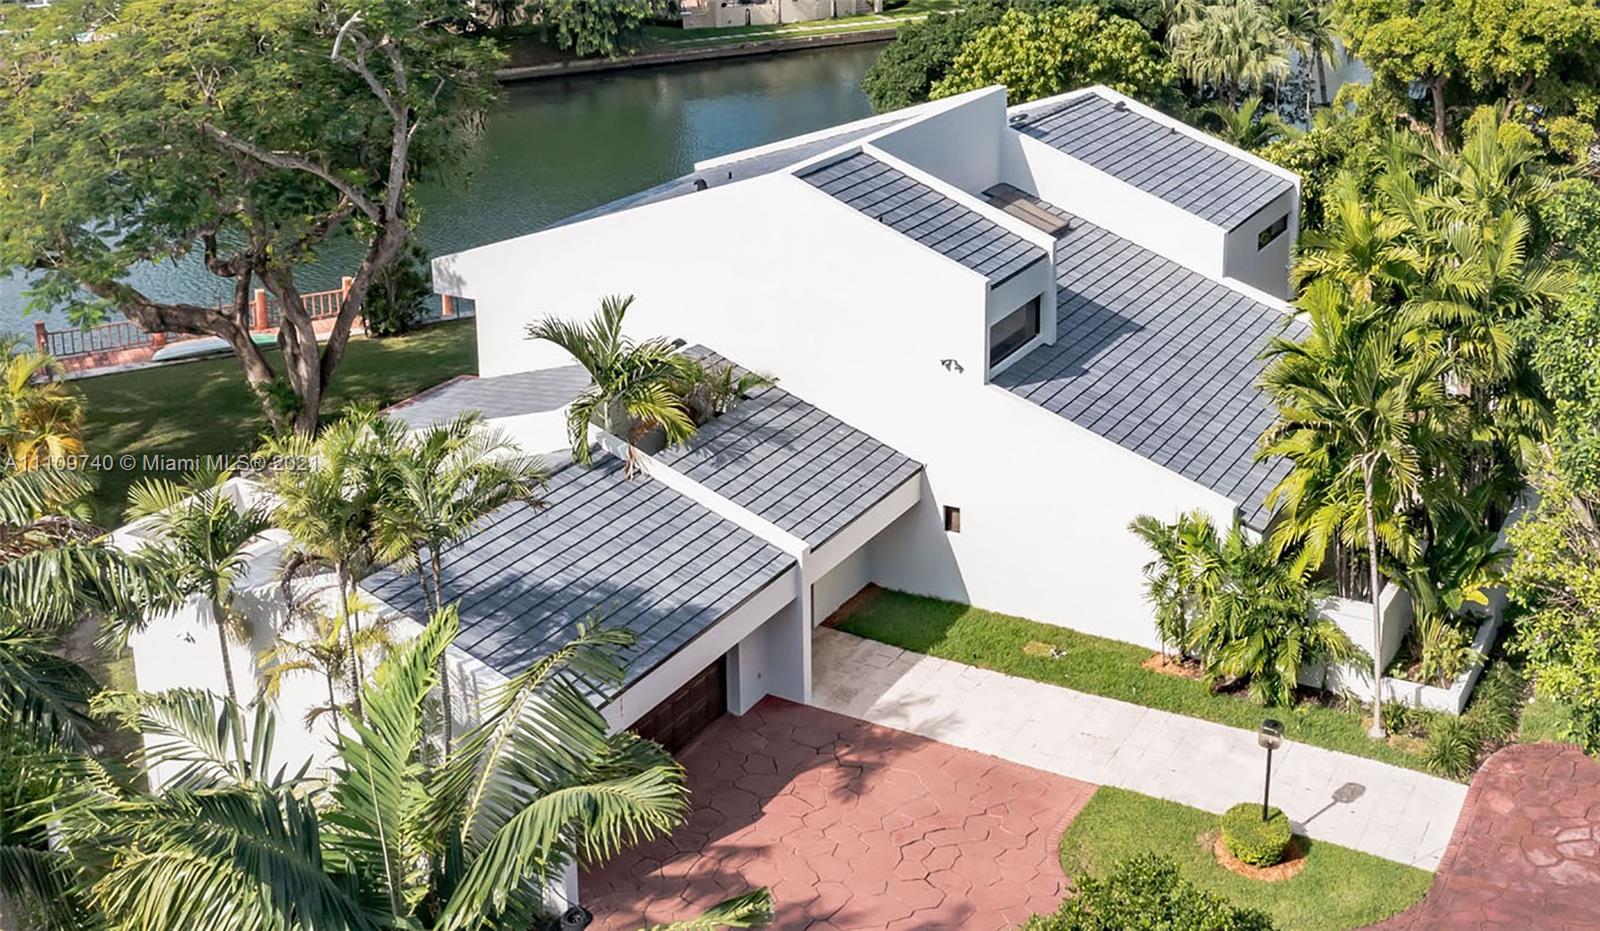 Amazing Coral Gables waterfront home on one of the widest parts of the Coral Gables Waterway. Beautiful lot with 125’ of water frontage, custom-built concrete sea wall and boat dock. Boat, paddle or kayak to Biscayne Bay! Open, sun-filled 5 bed/5 bath, 5,000 sq ft home just updated with brand NEW roof and more. Great spaces for family living and entertaining, including huge family room with billiard table, large private office, spacious kitchen and breakfast room, service quarters, expansive master suite, and more. Ample room for a backyard oasis. Located in the heart of the Gables, close to top schools, business and entertainment/shopping districts, airport, hospitals, UM, Biltmore and Riviera Country Club golf courses. The perfect opportunity to live the best waterfront life.